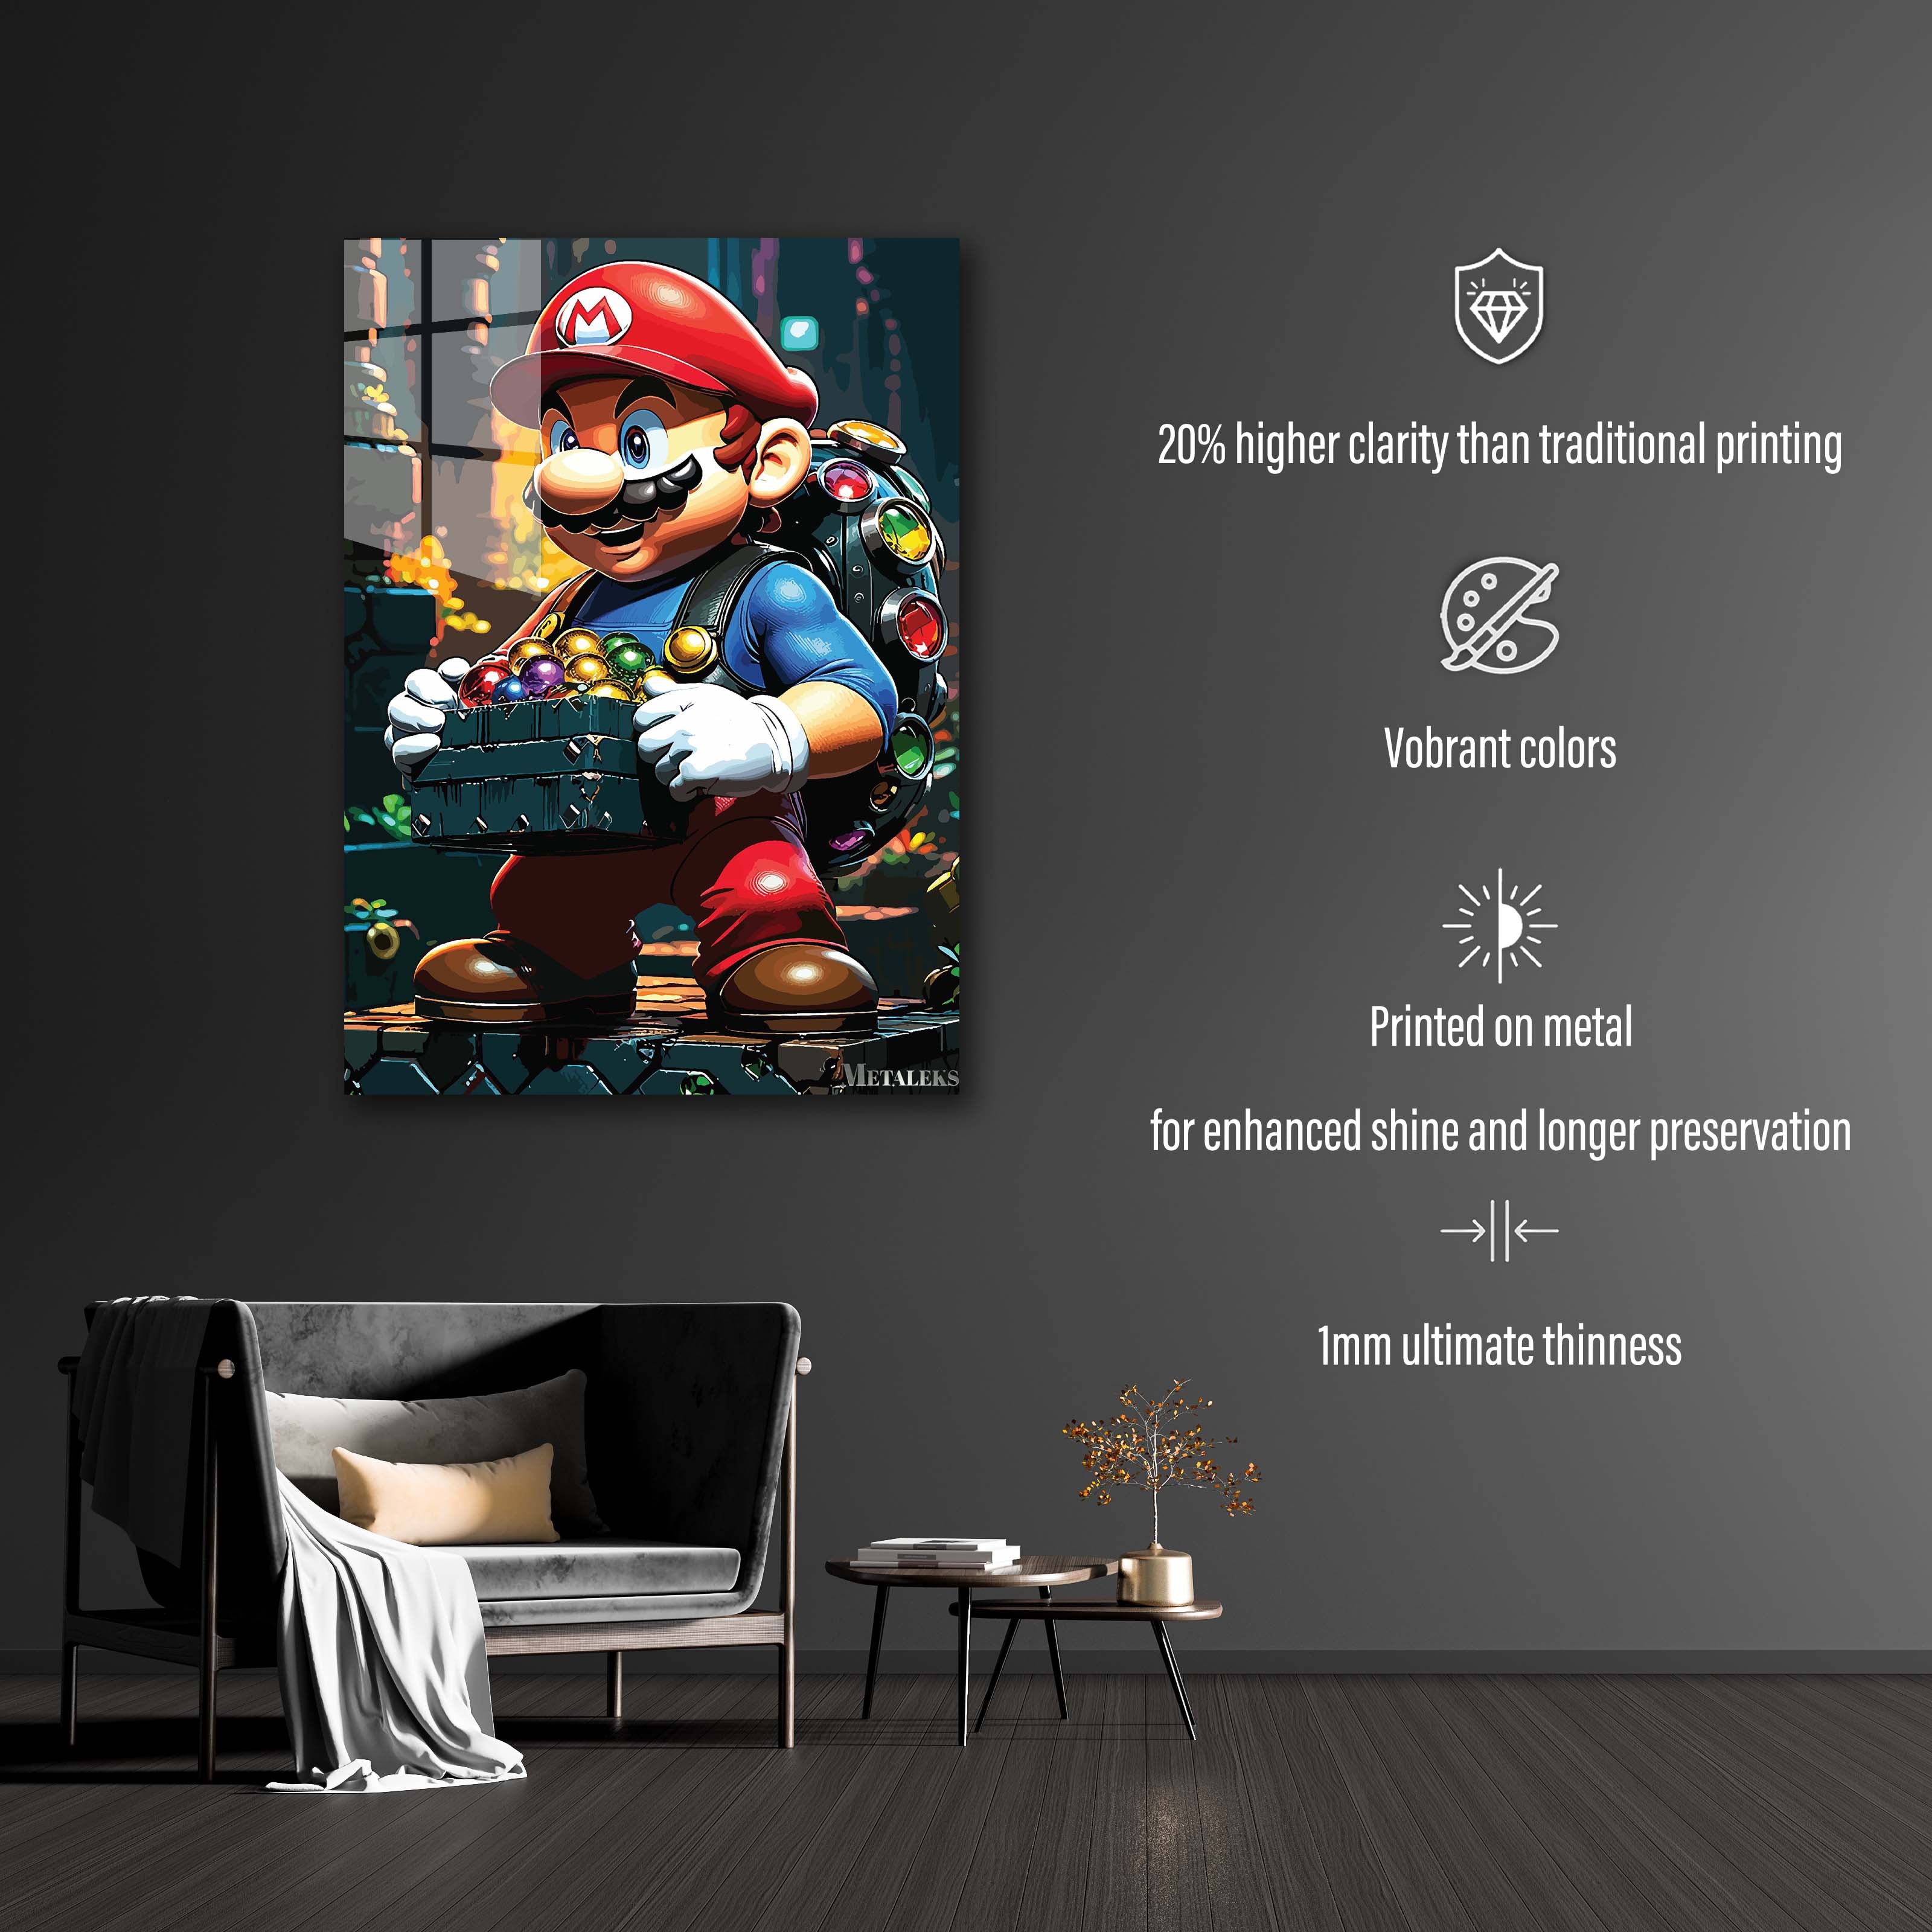 Super Mario Gaming-designed by @Grafity Artistry